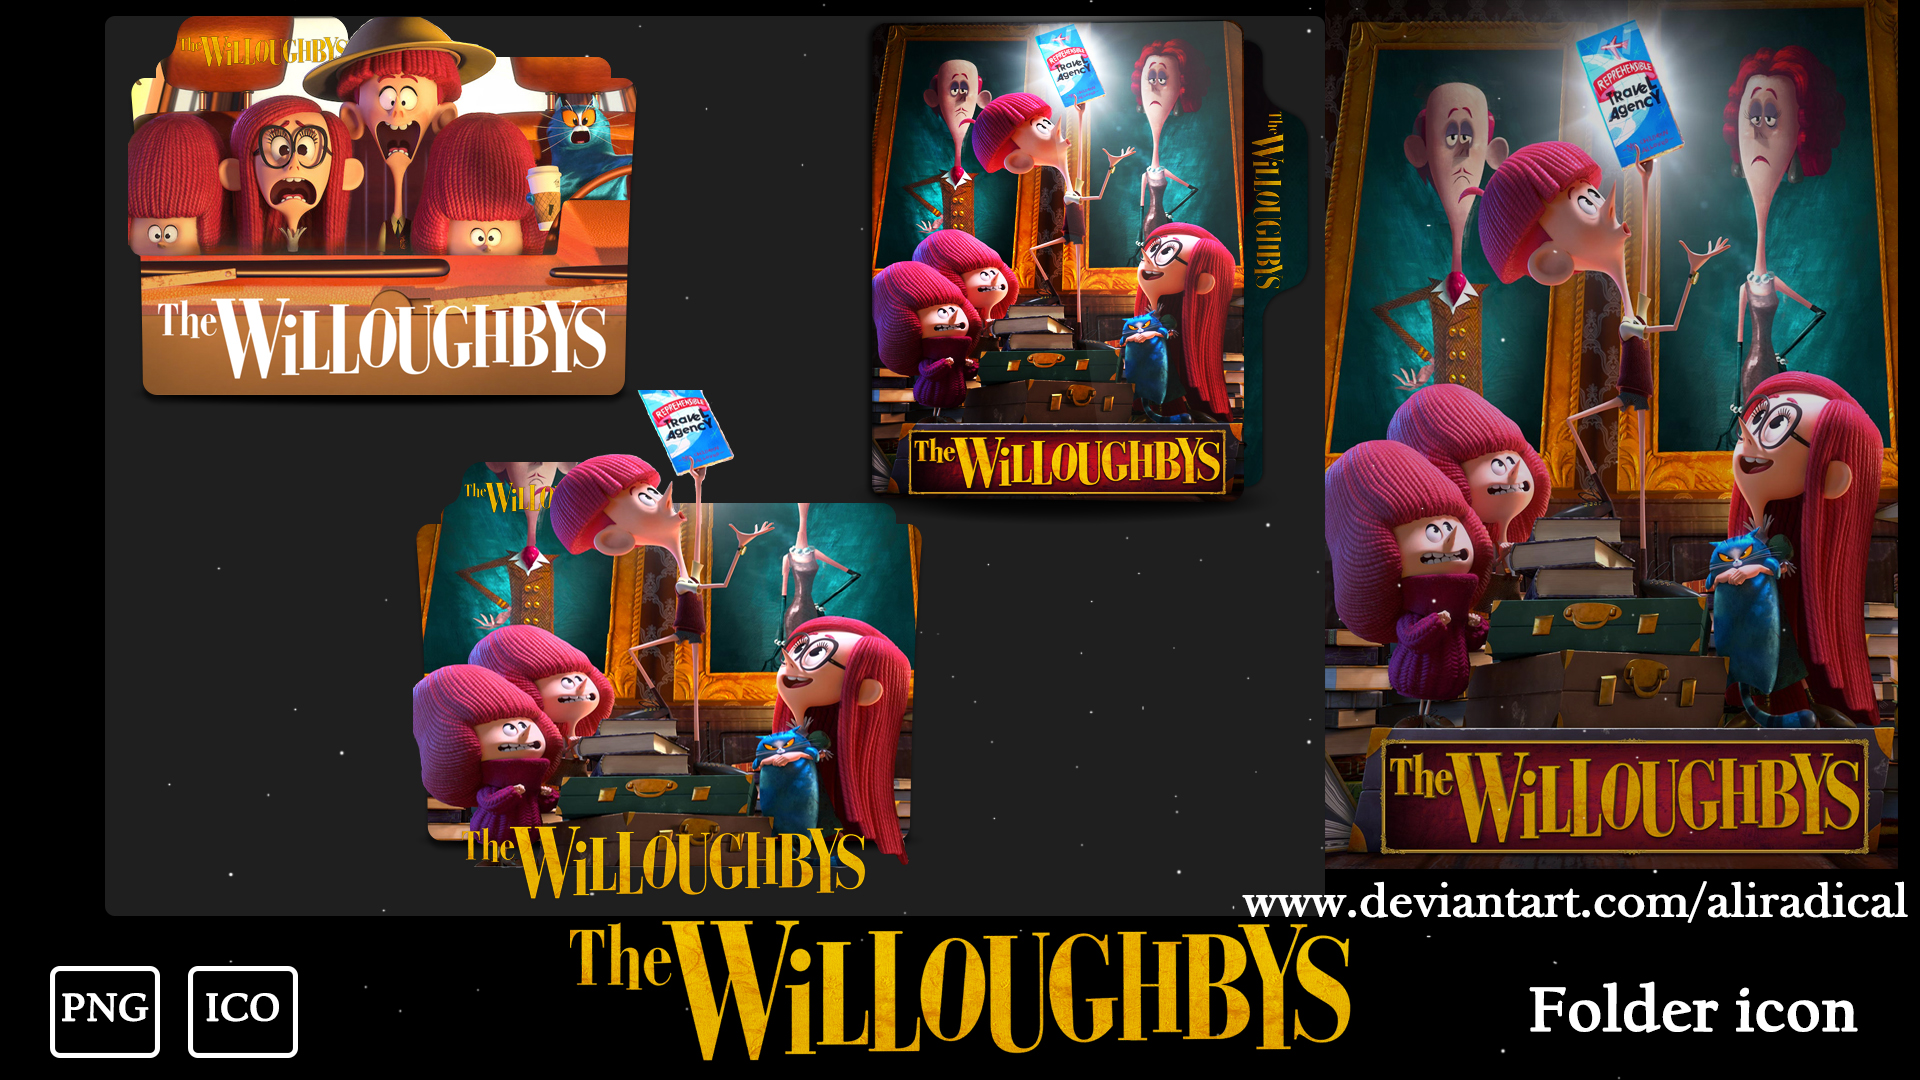 The Willoughbys 2020 Movie Wallpapers